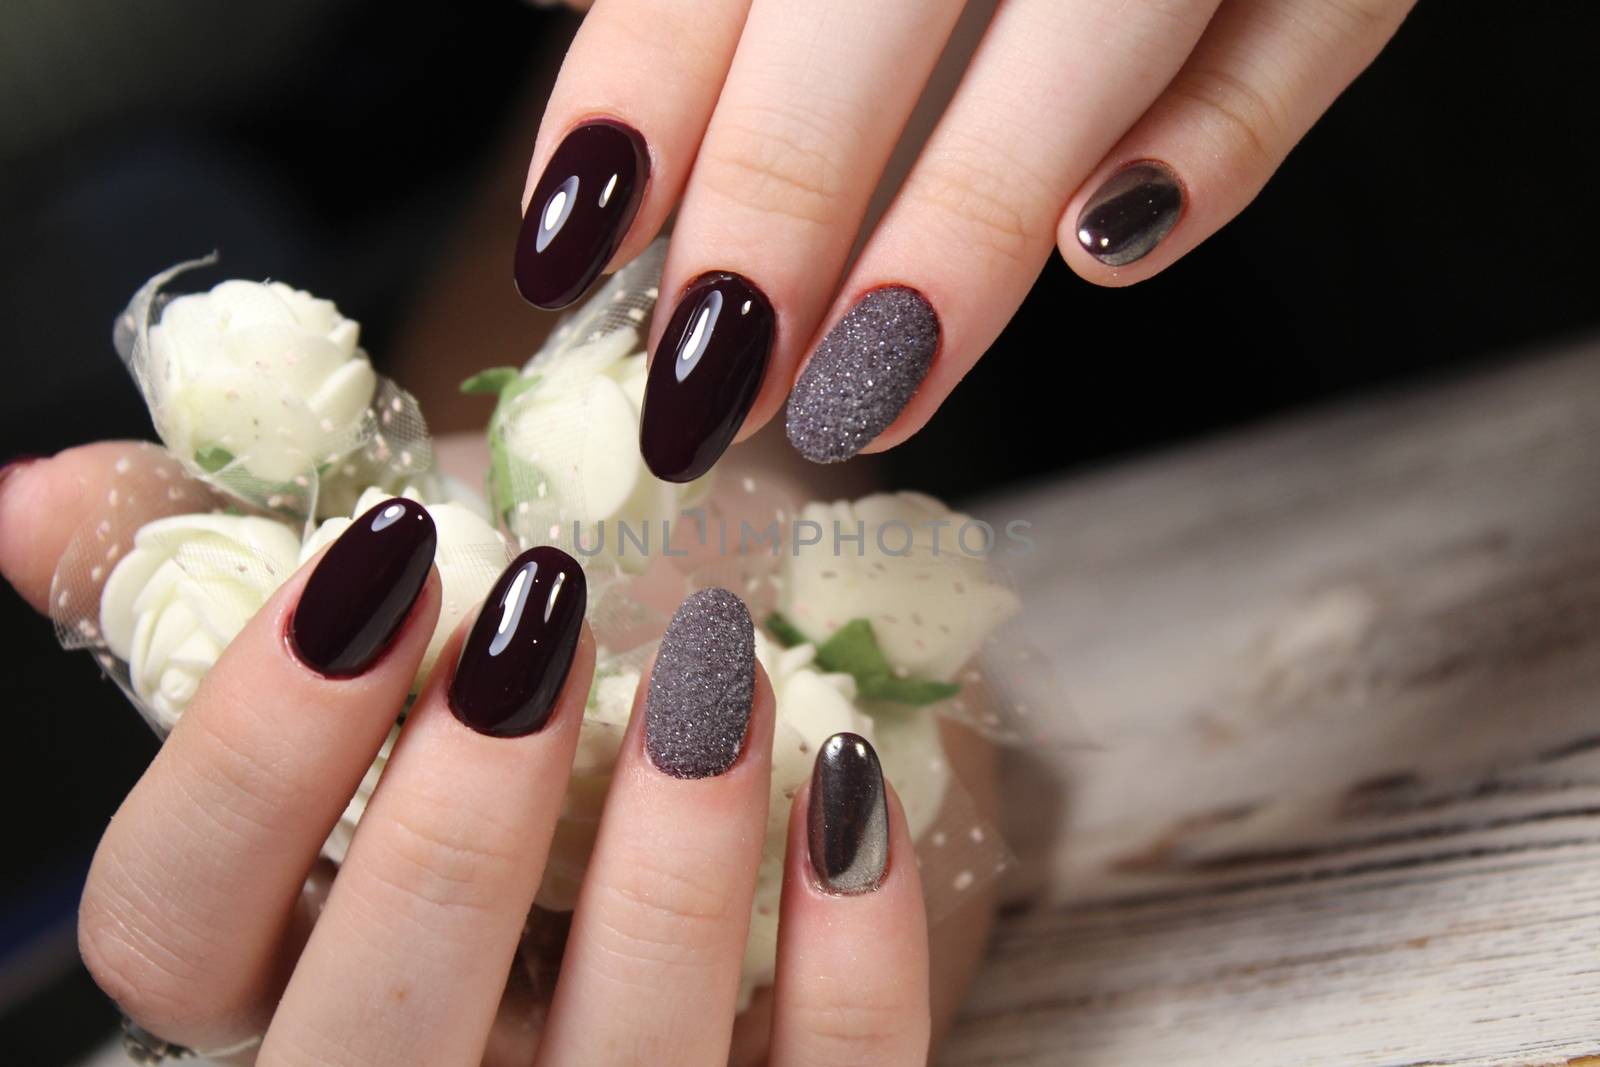 Stylish manicure nails color black and silver